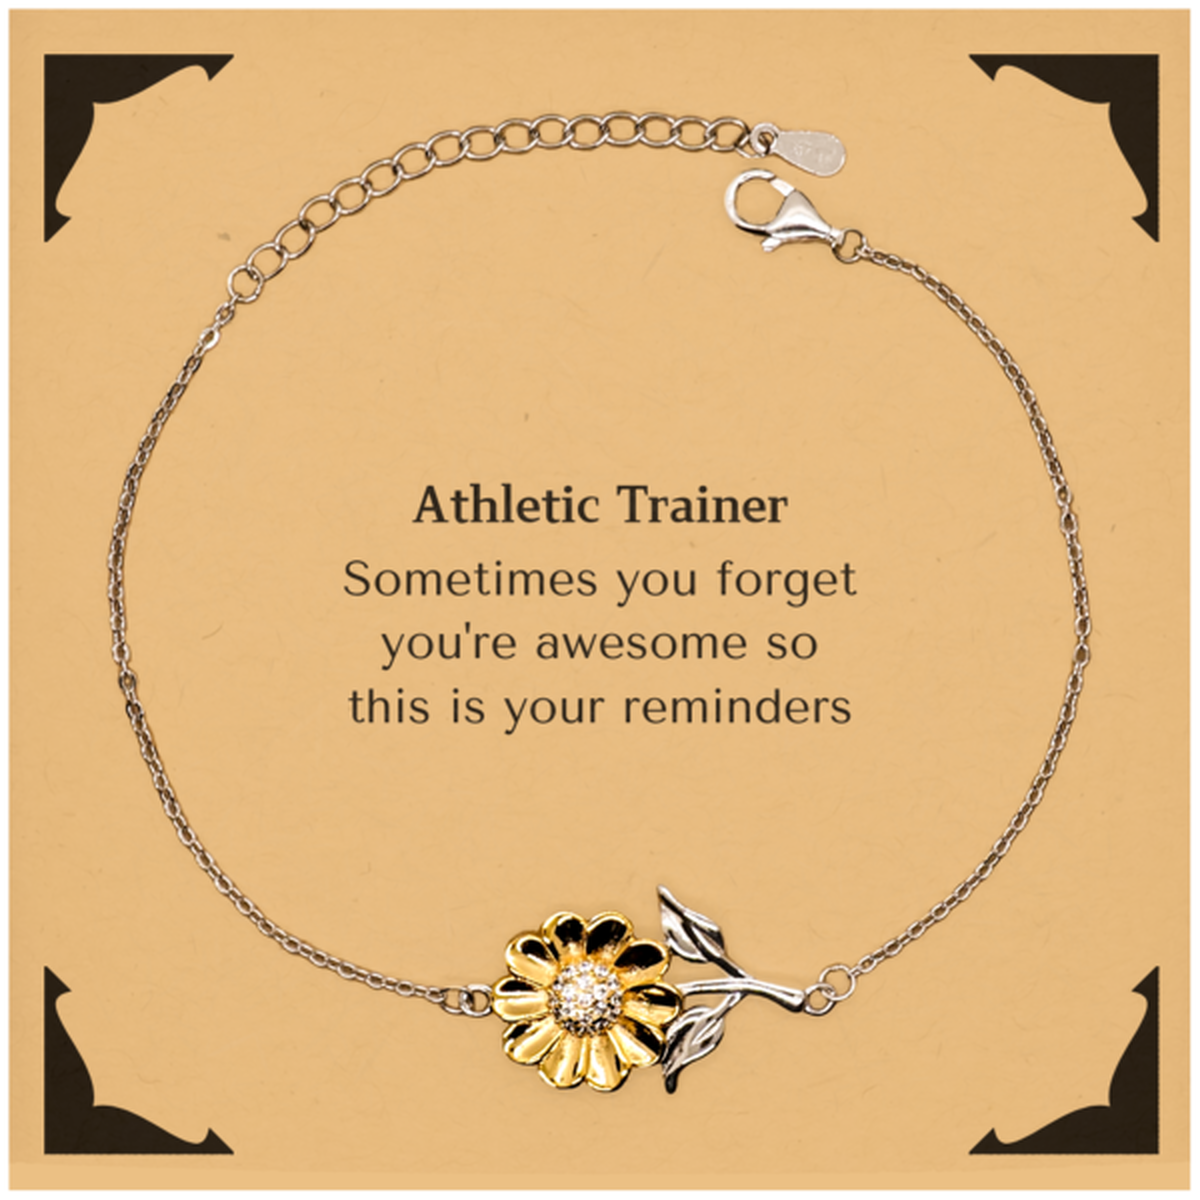 Sentimental Athletic Trainer Sunflower Bracelet, Athletic Trainer Sometimes you forget you're awesome so this is your reminders, Graduation Christmas Birthday Gifts for Athletic Trainer, Men, Women, Coworkers